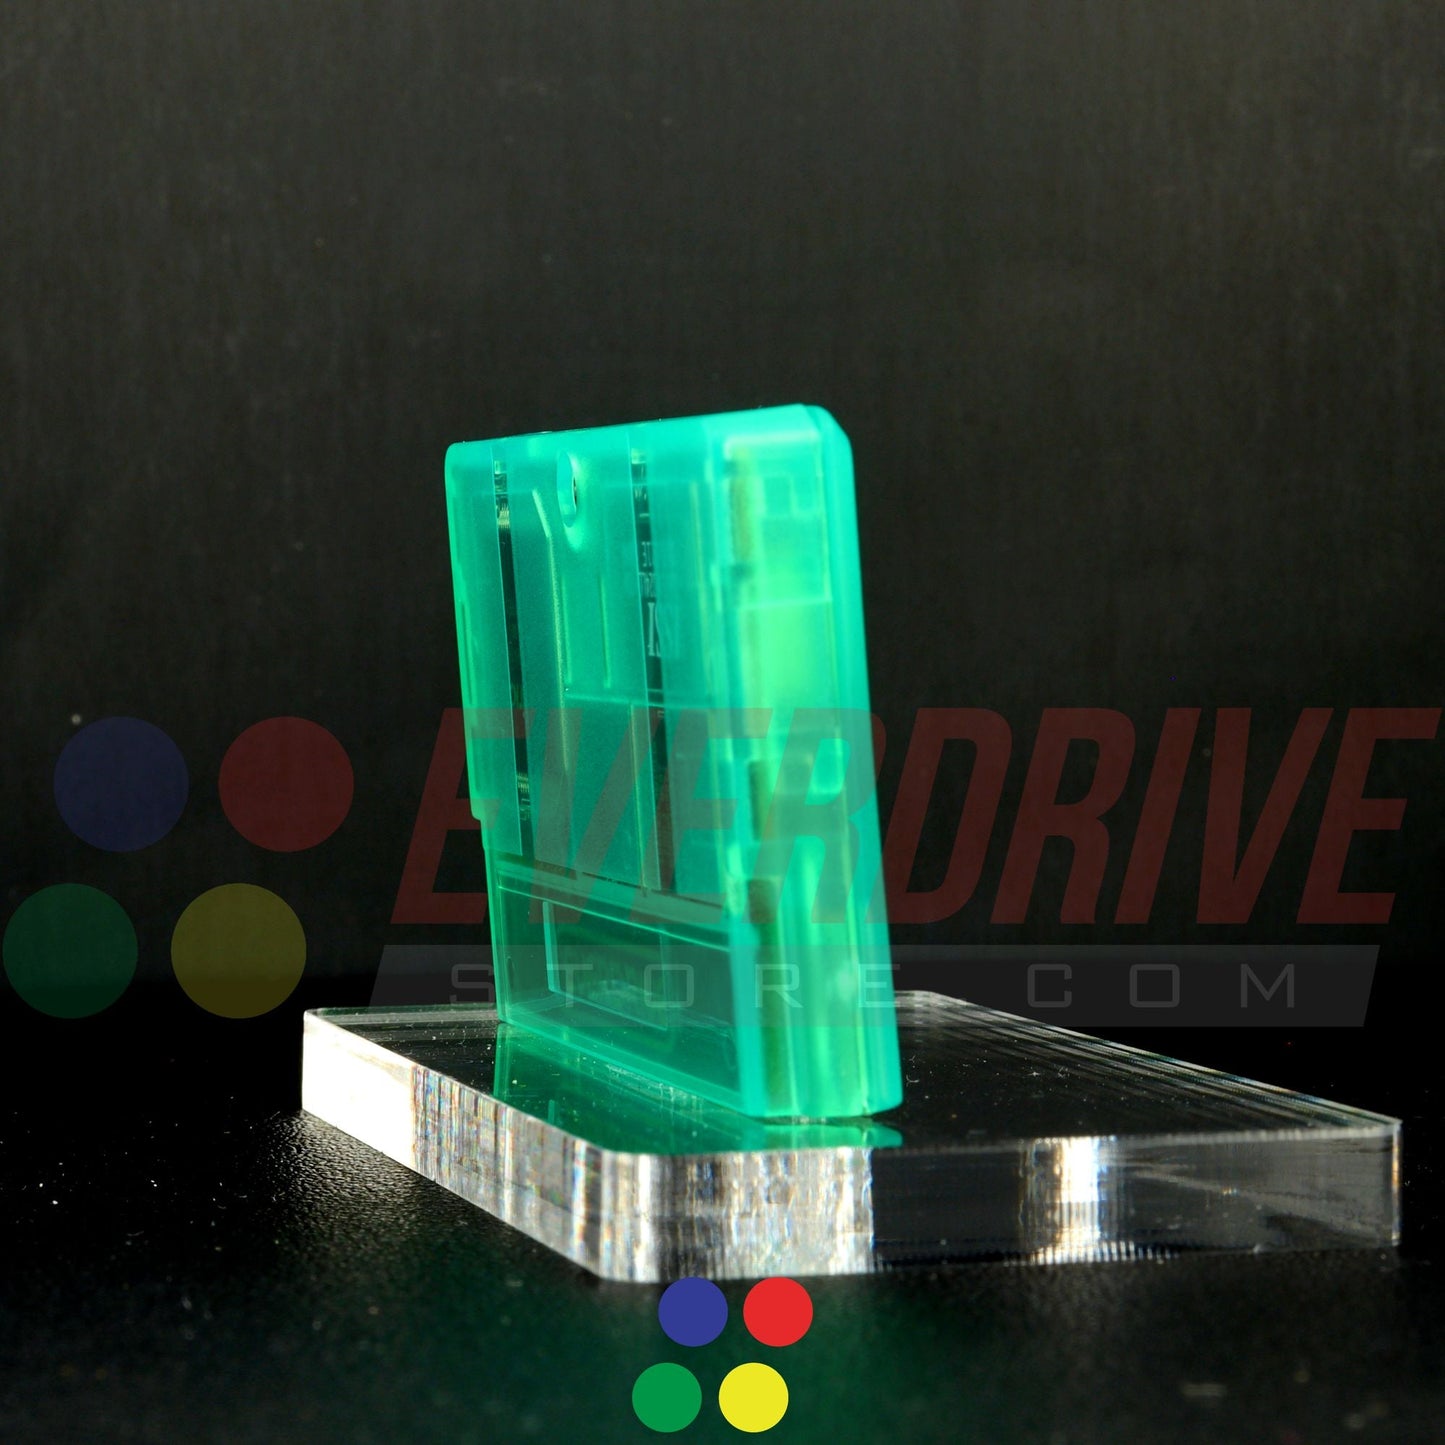 Everdrive GBA Mini - Frosted Green